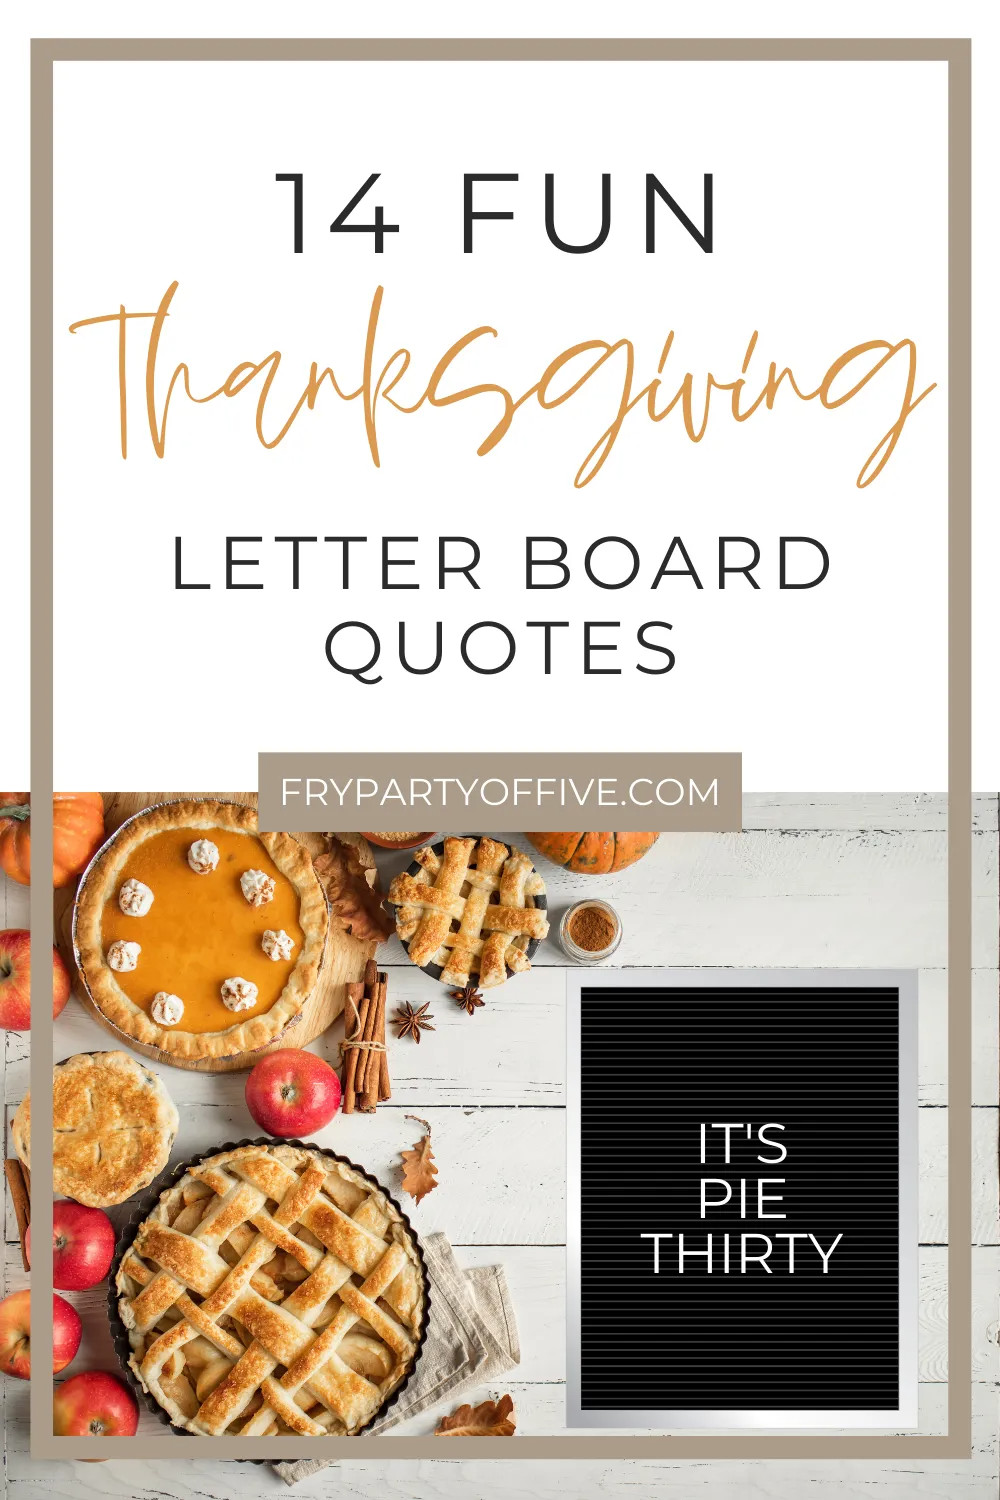 Thanksgiving Quotes Board
 Thanksgiving Letter Board Quotes in 2020